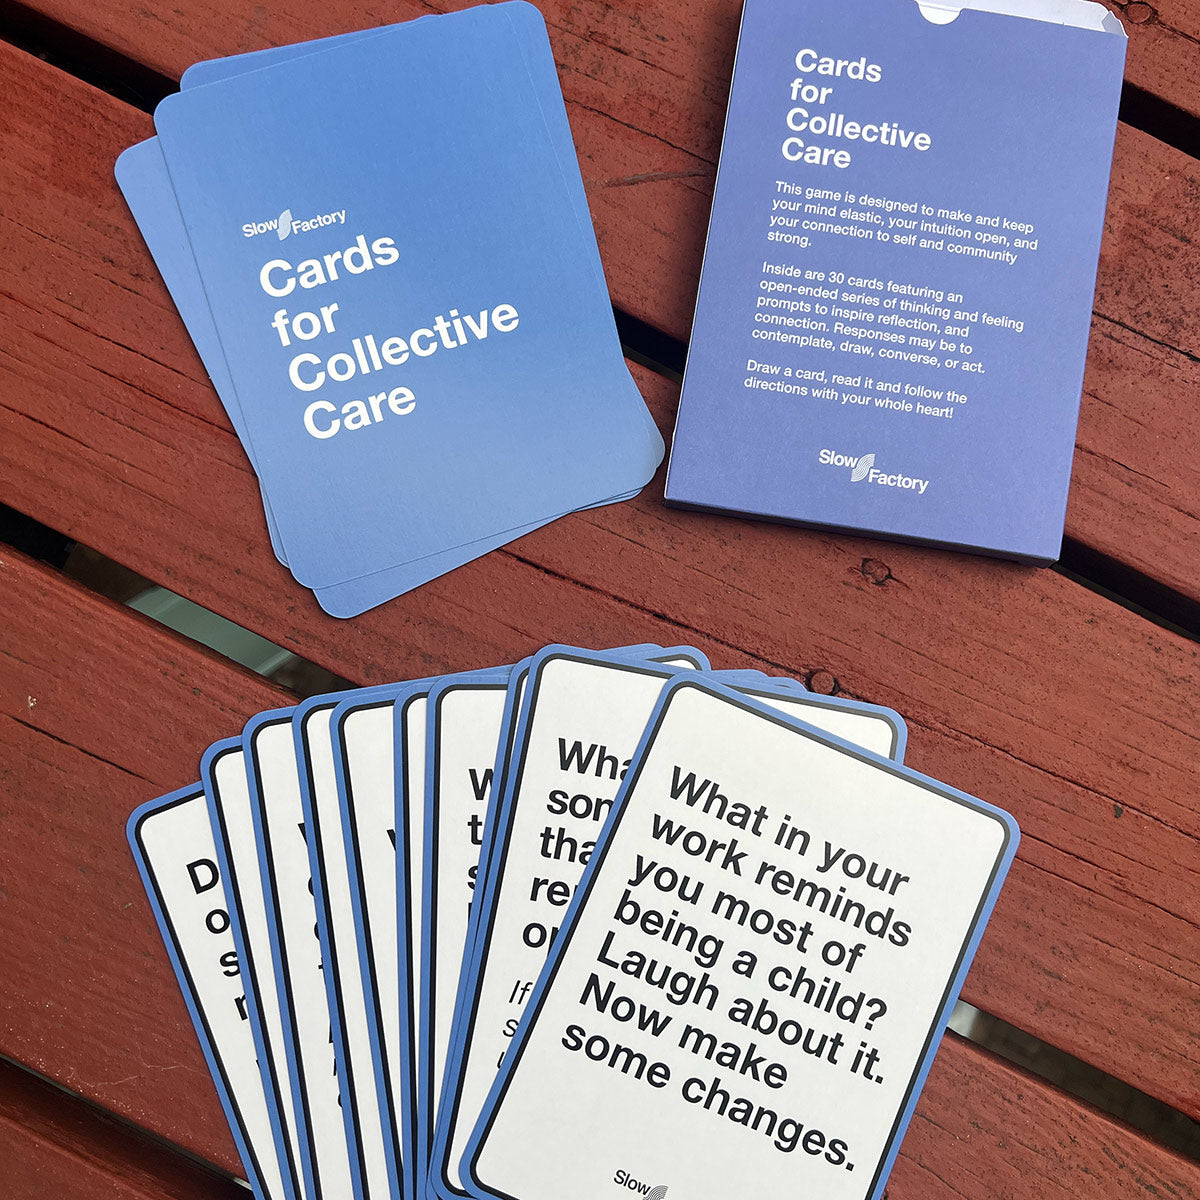 Cards for Collective Care